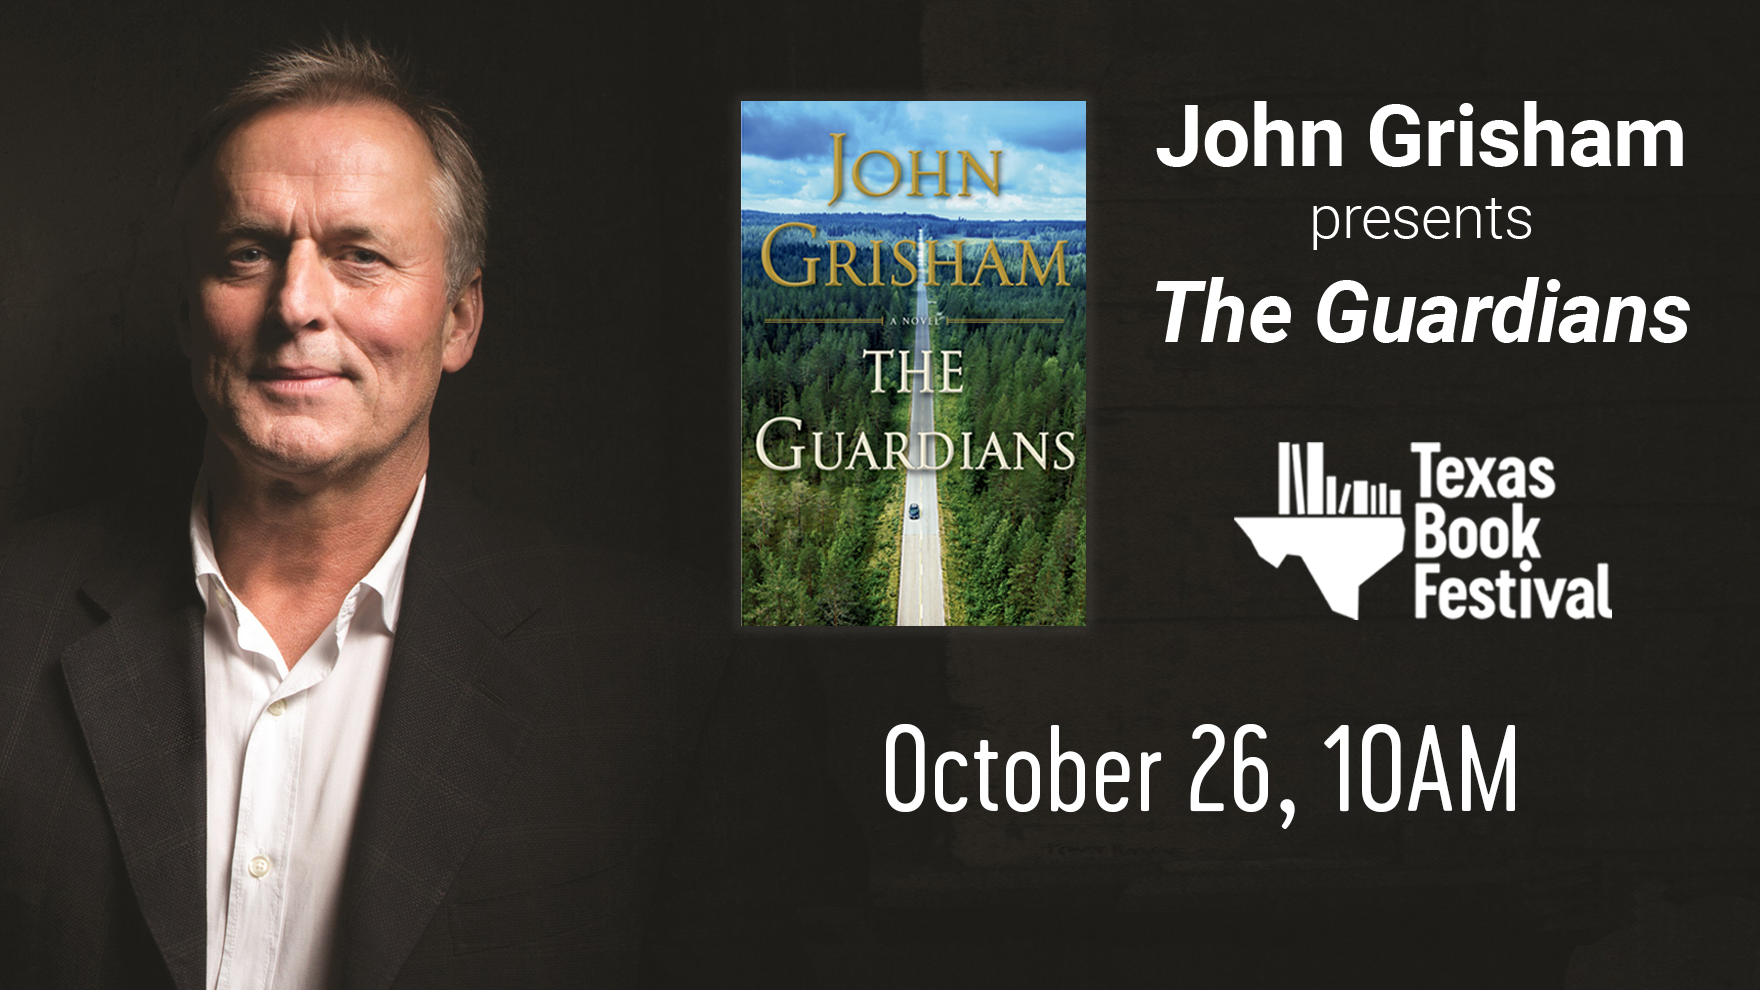 SOLD OUT – John Grisham presents THE GUARDIANS – Saturday, October 26 10AM